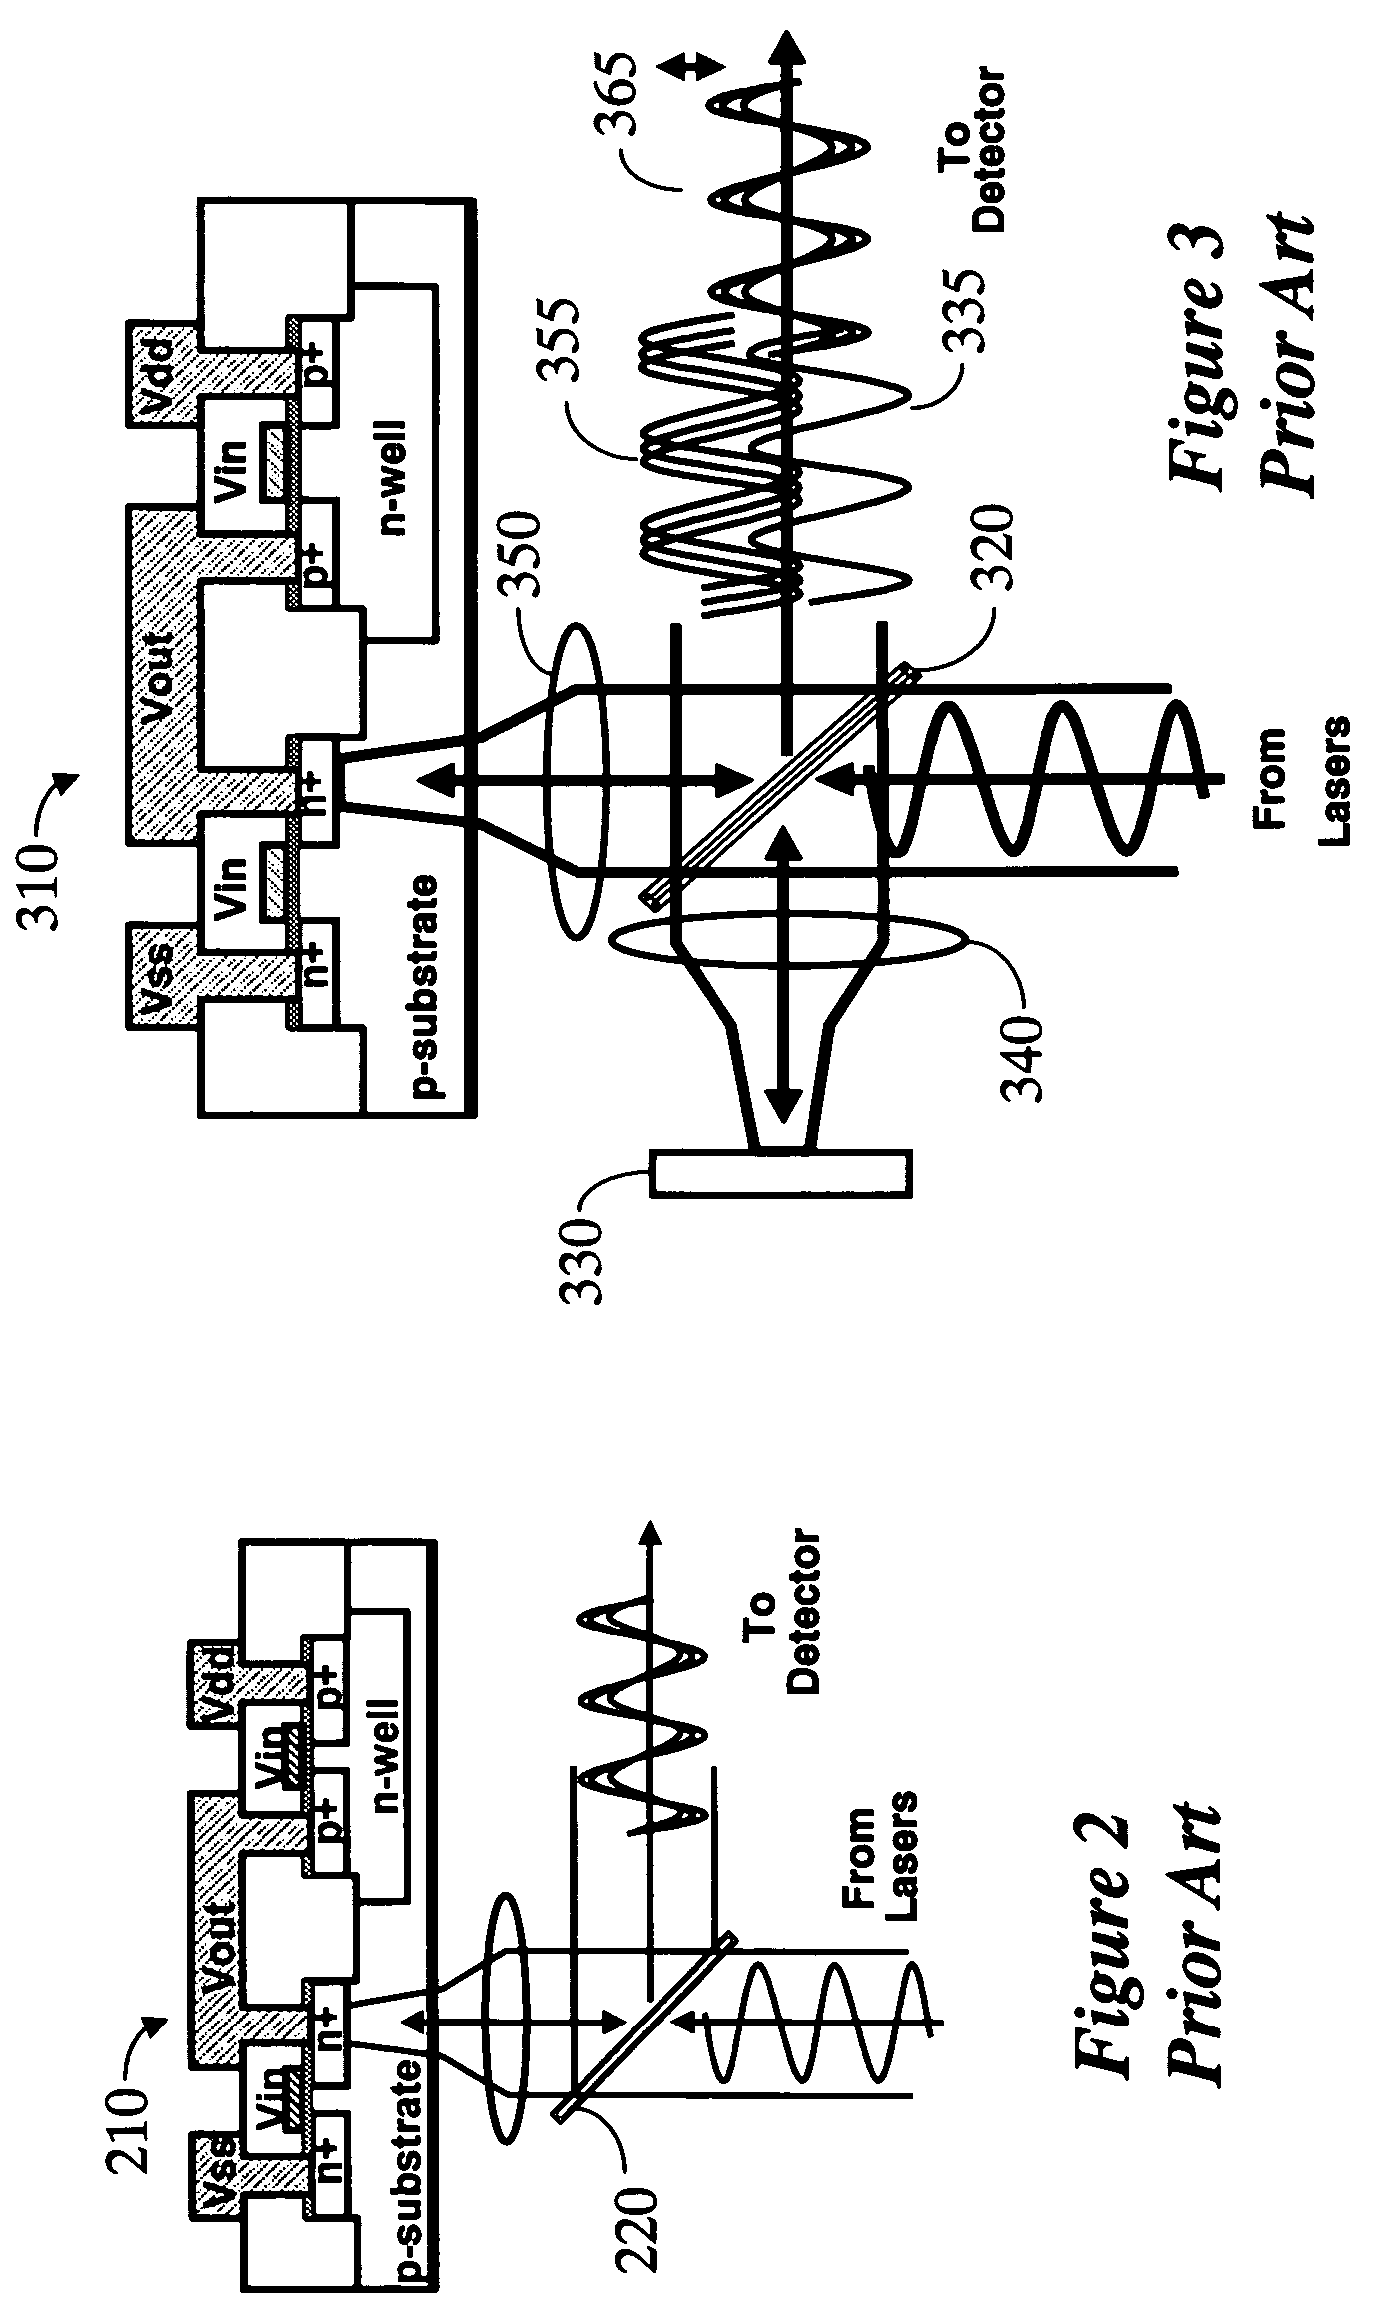 Method and apparatus for measuring high-bandwidth electrical signals using modulation in an optical probing system